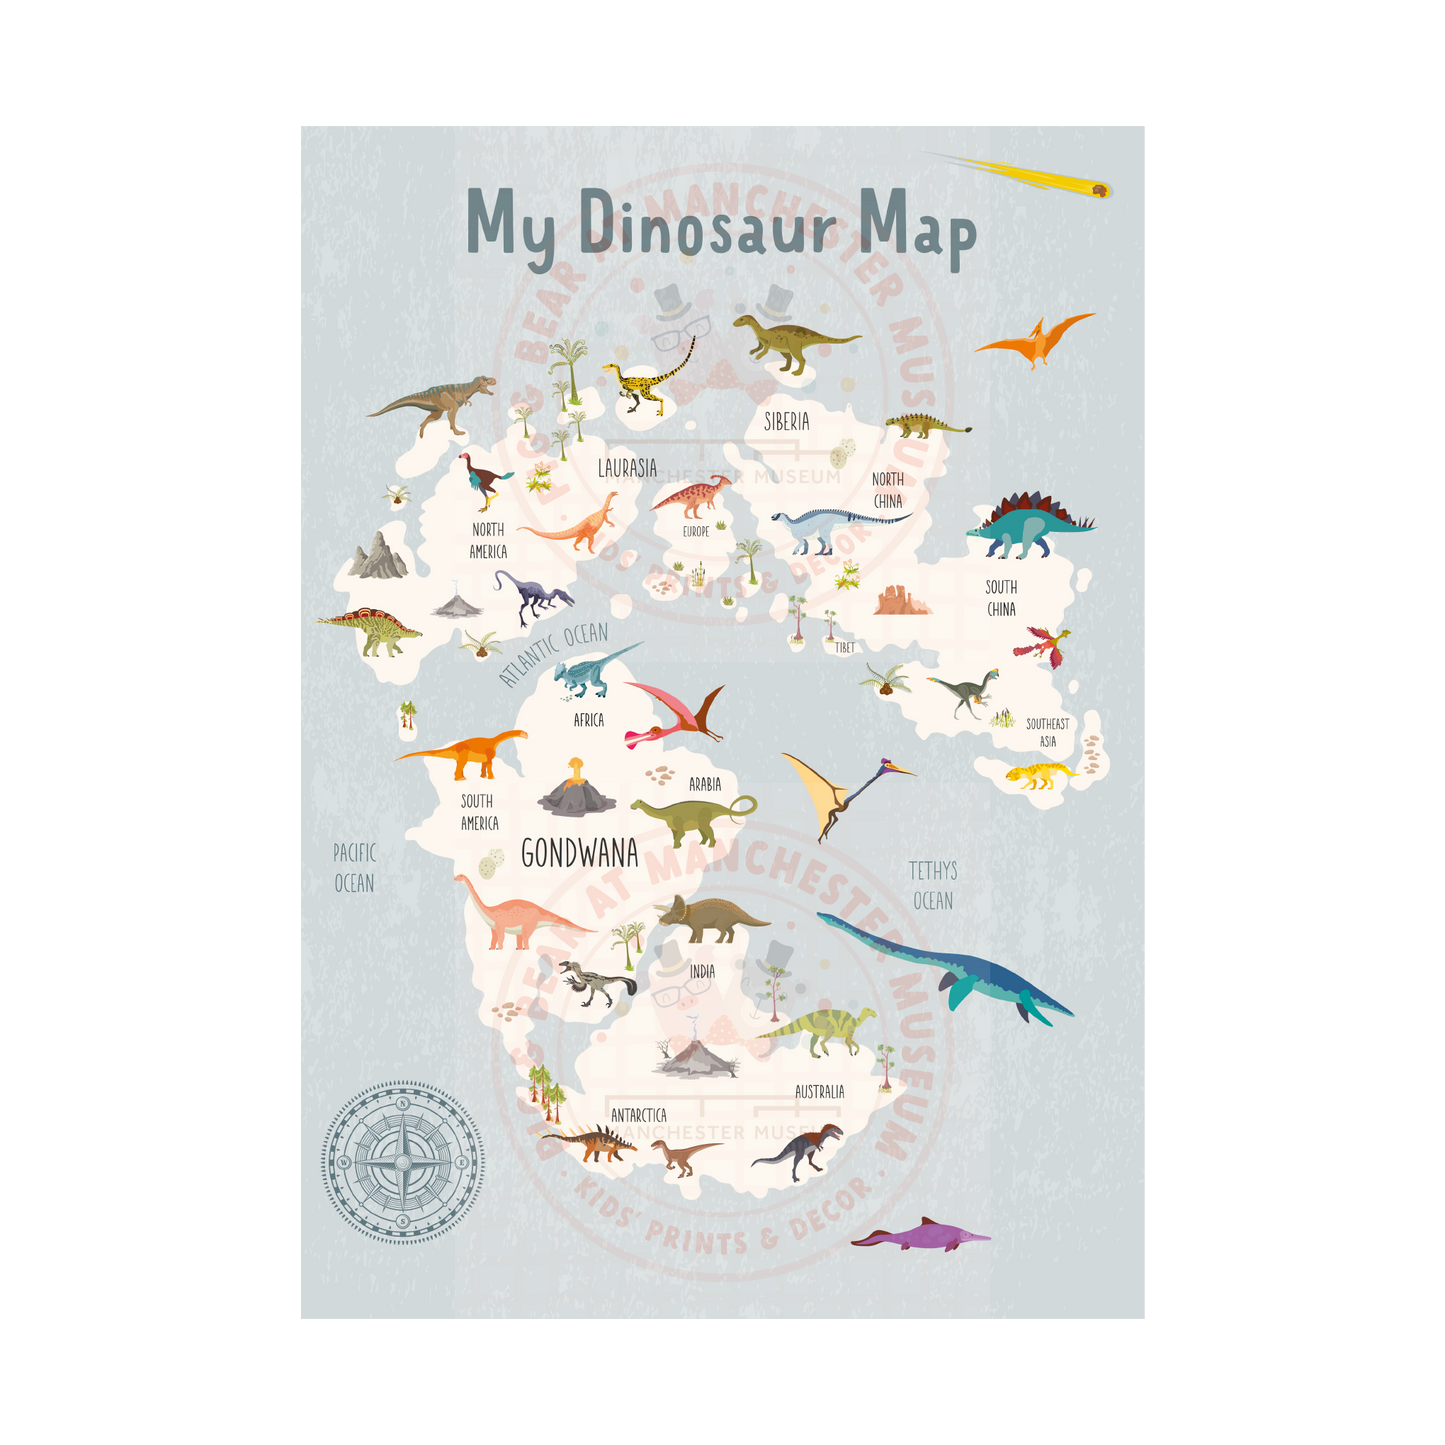 Print with the headline text, my dinosaur map. The map is showing the super continent Gondwana.